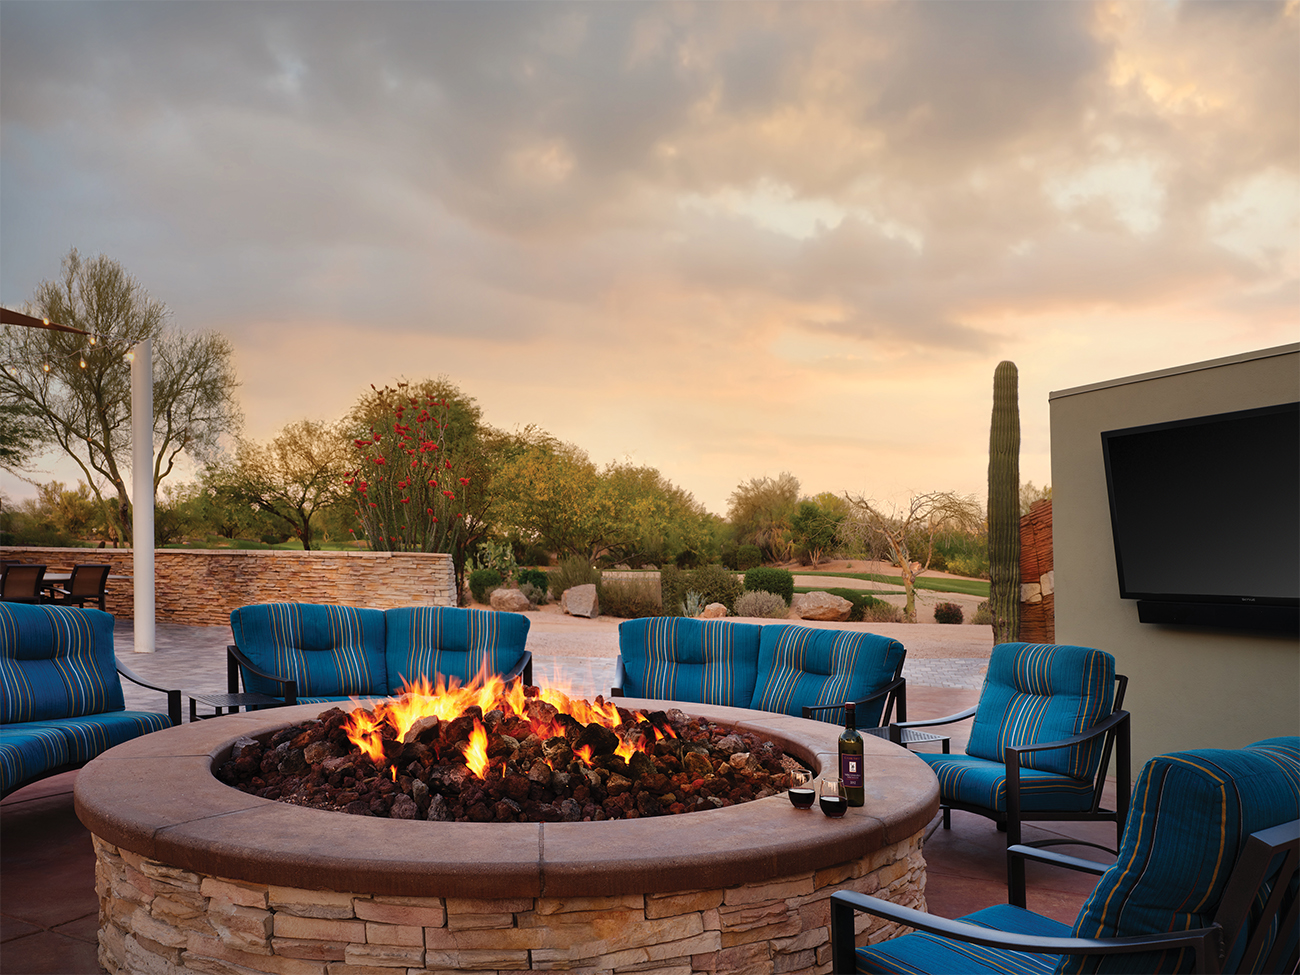 Marriott's Canyon Villas Fire Pit. Marriott's Canyon Villas is located in Phoenix, Arizona United States.